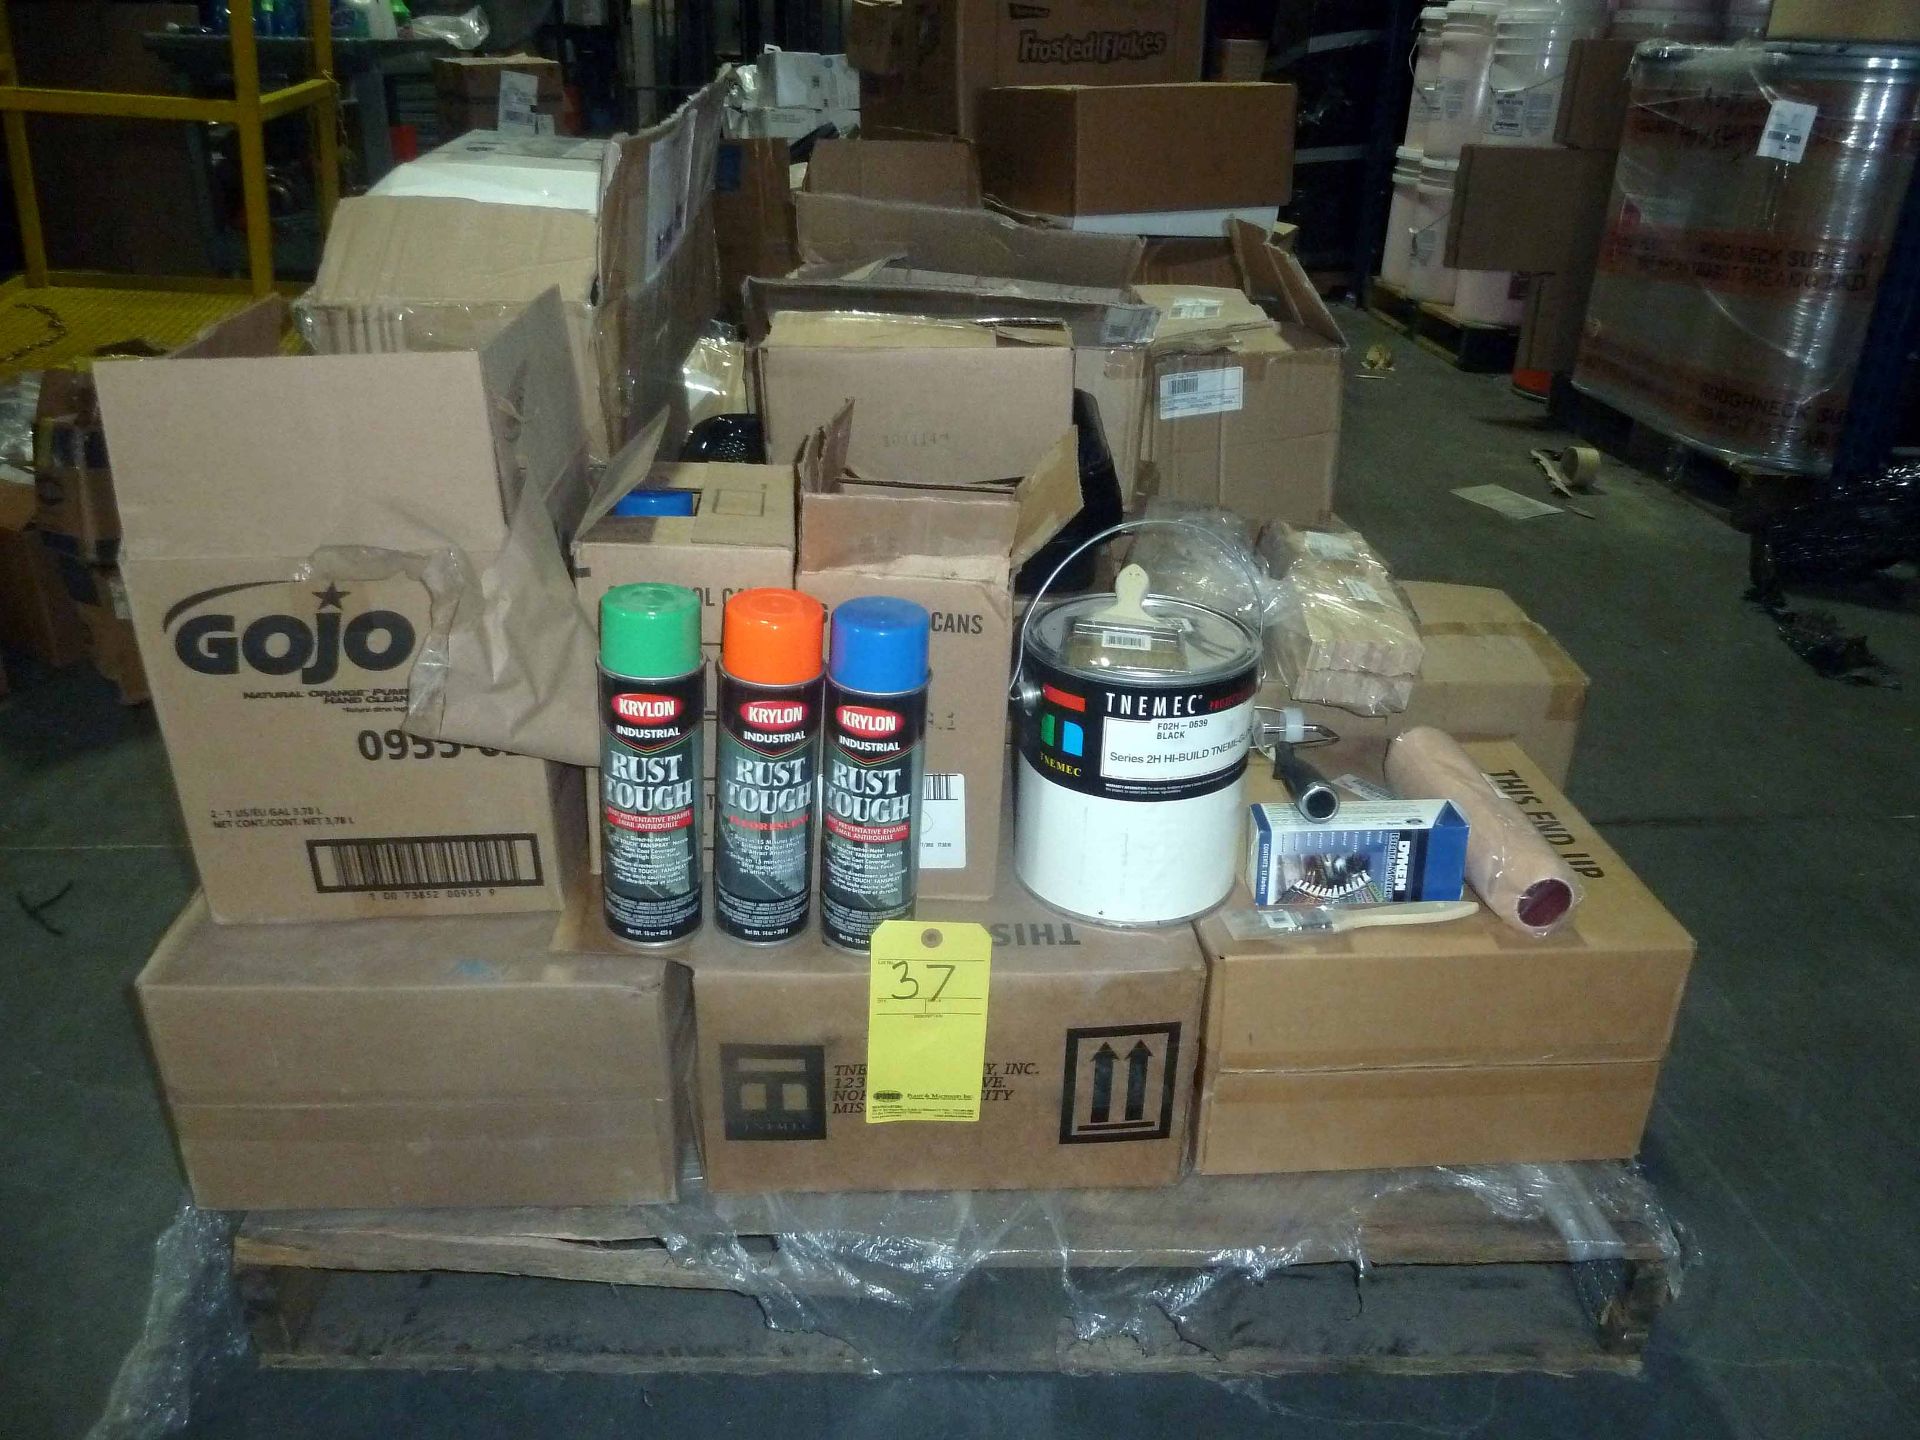 LOT OF PAINTING SUPPLIES: 1 gal. paint cans, spay cans (blue, black, orange, green), paint